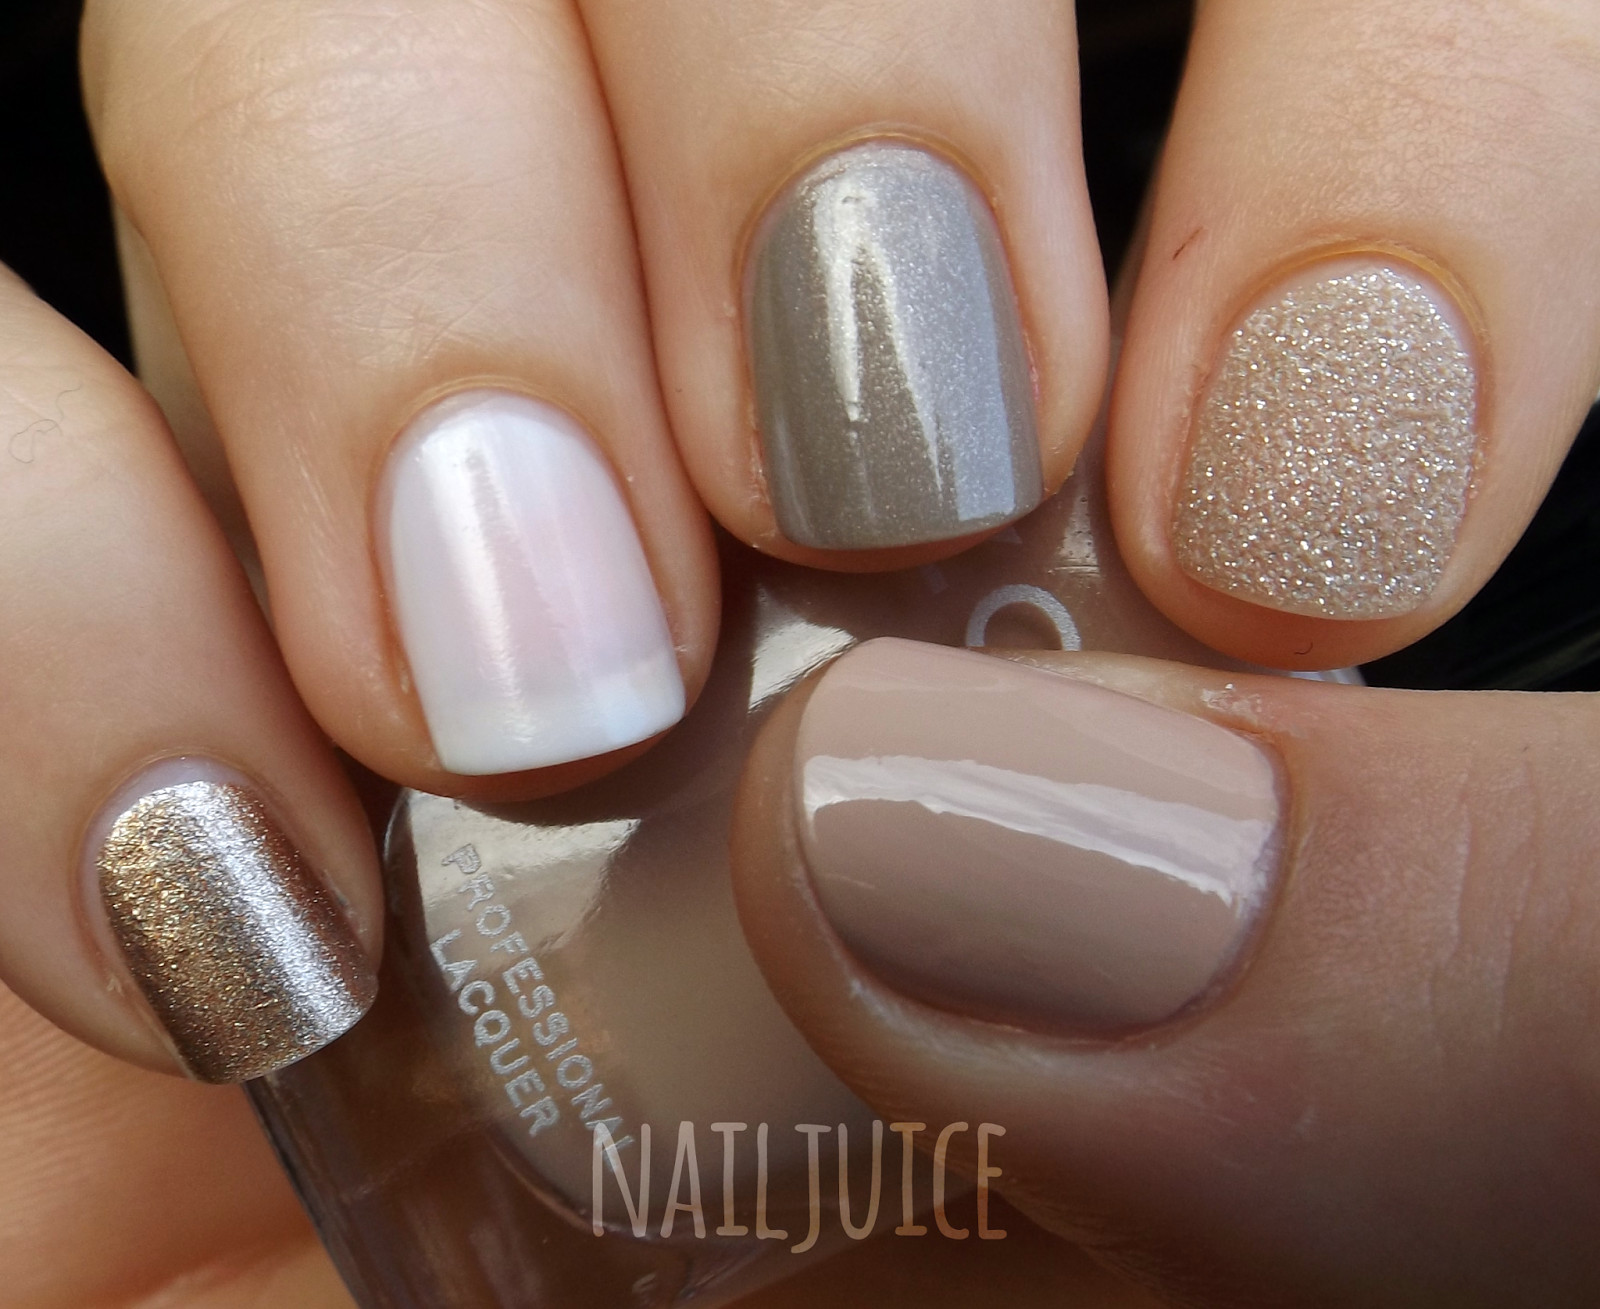 Neutral Gel Nail Colors
 Nail Juice Nail Mail Pt 2 Golds & Neutrals